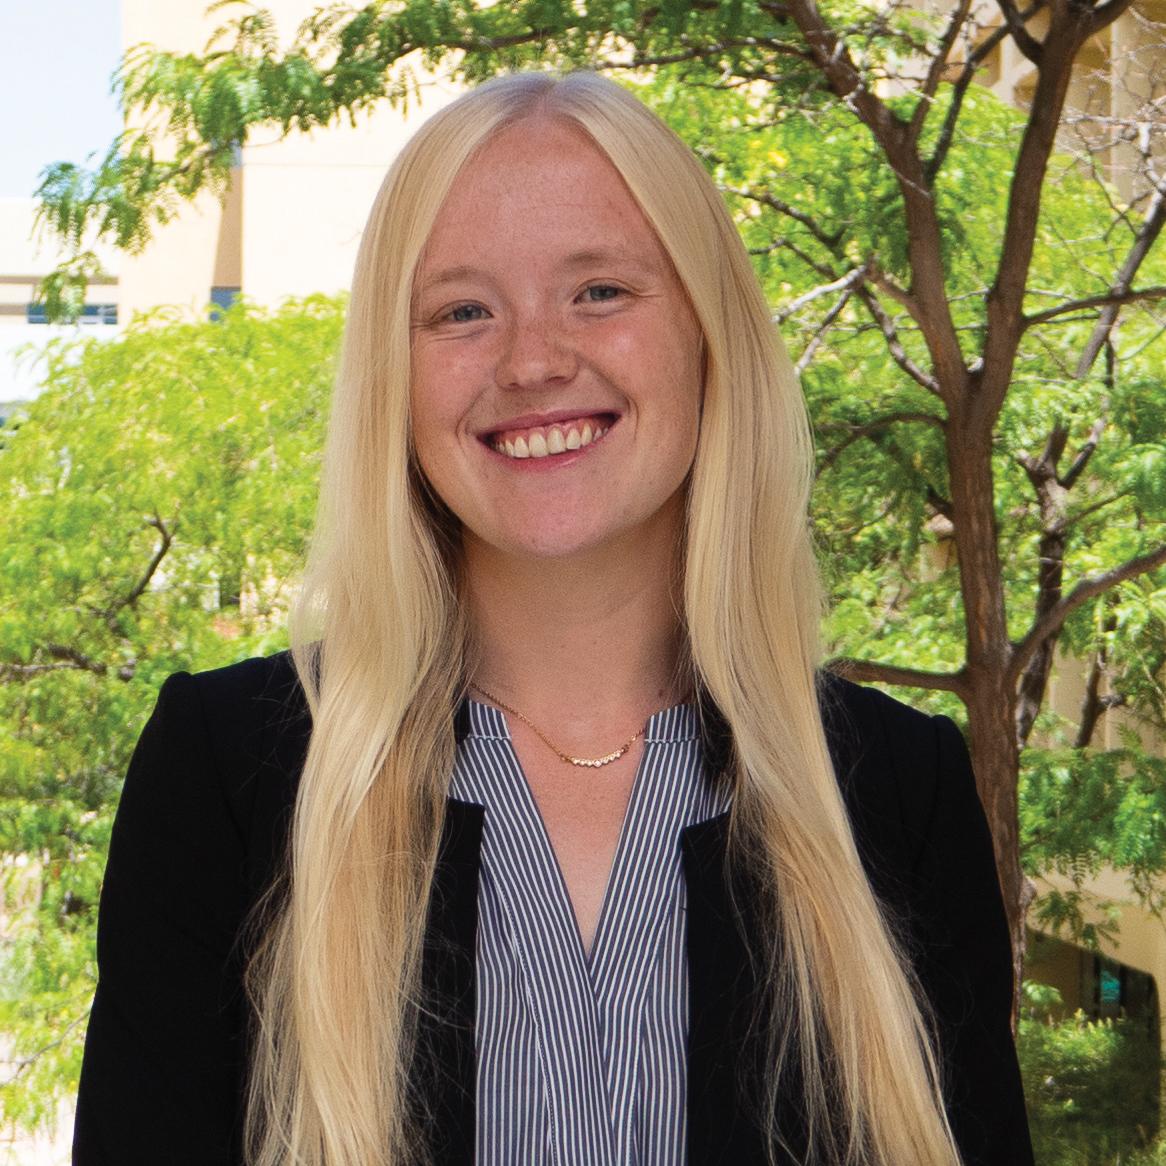 Rachel Fleddermann  Class of 2014    Medical Student, UNM School of Medicine Biology B.S., University of Wisconsin-Madison  “The leadership skills I learned at Prep are still serving me well today as I navigate medical school.”